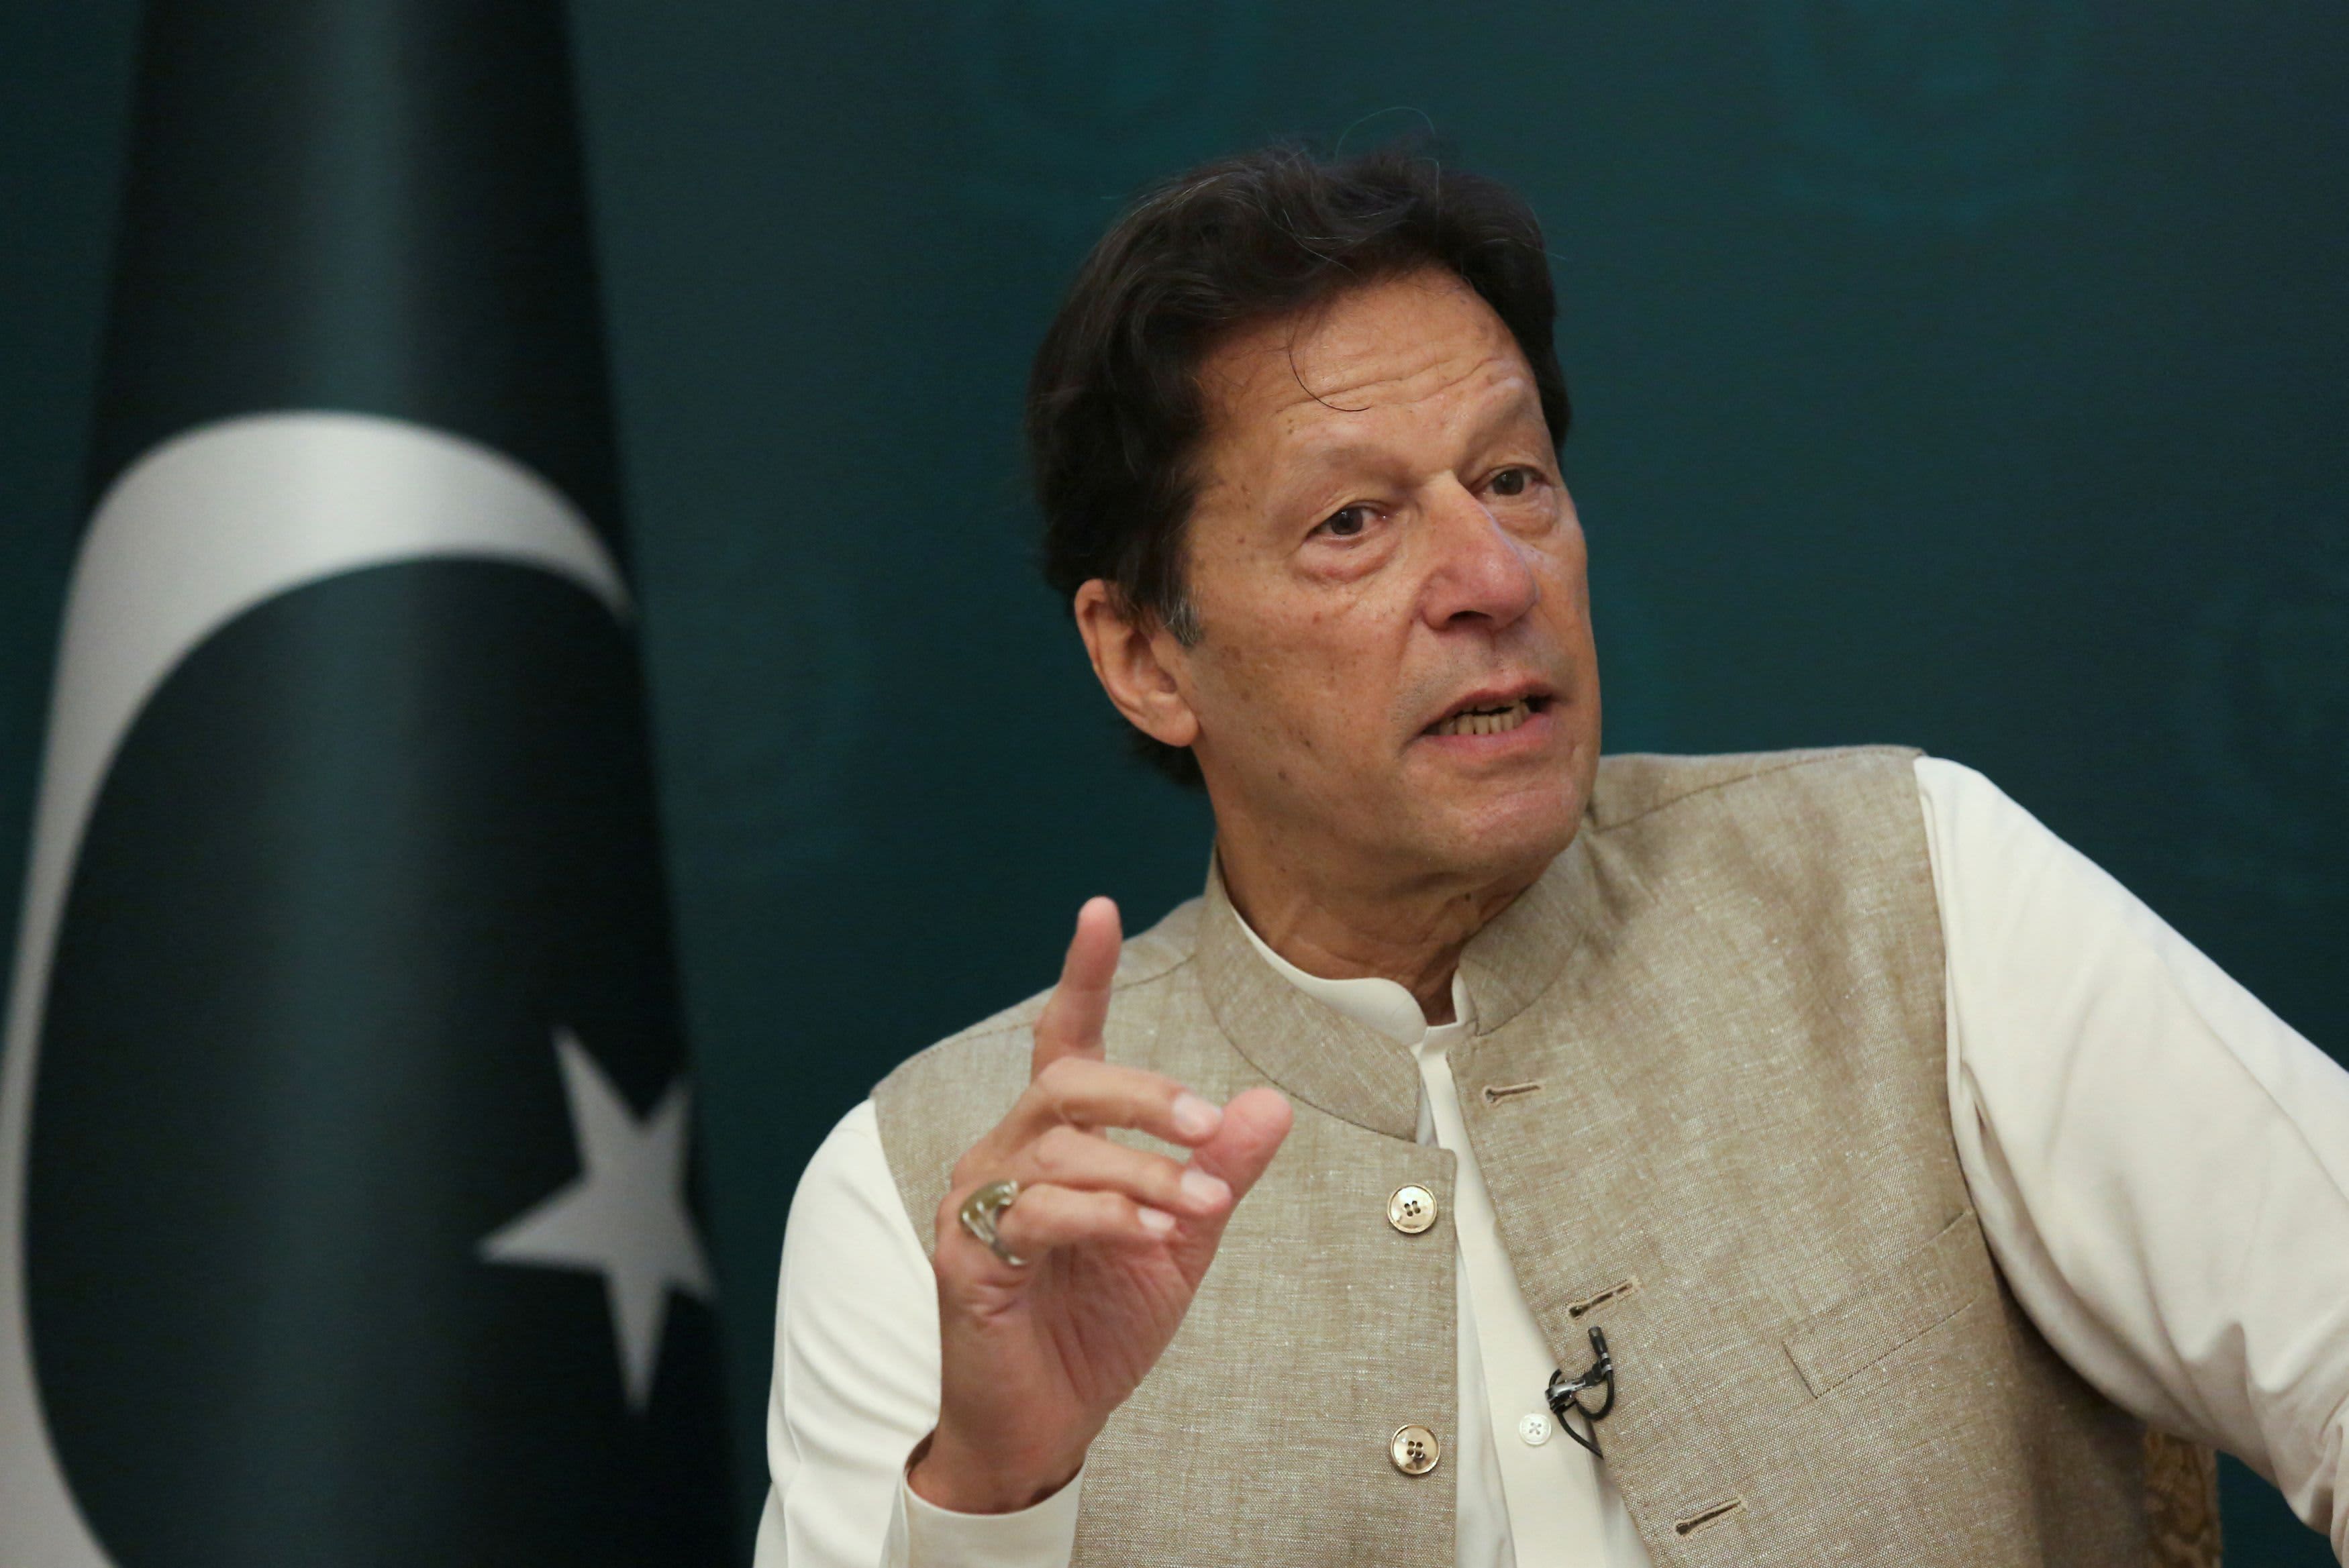 Former Pakistani Prime Minister Imran Khan arrested in Islamabad